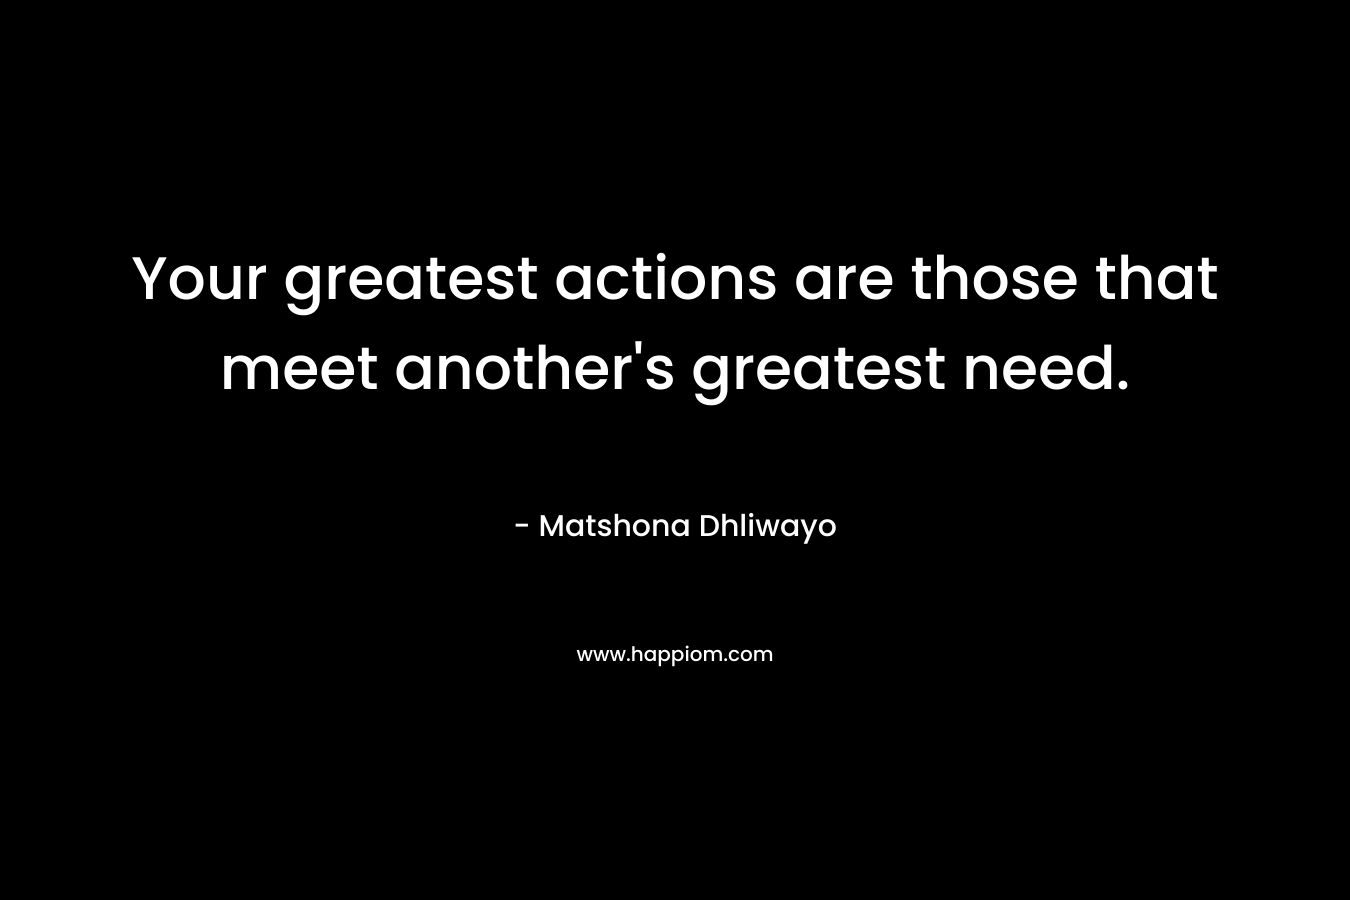 Your greatest actions are those that meet another's greatest need.